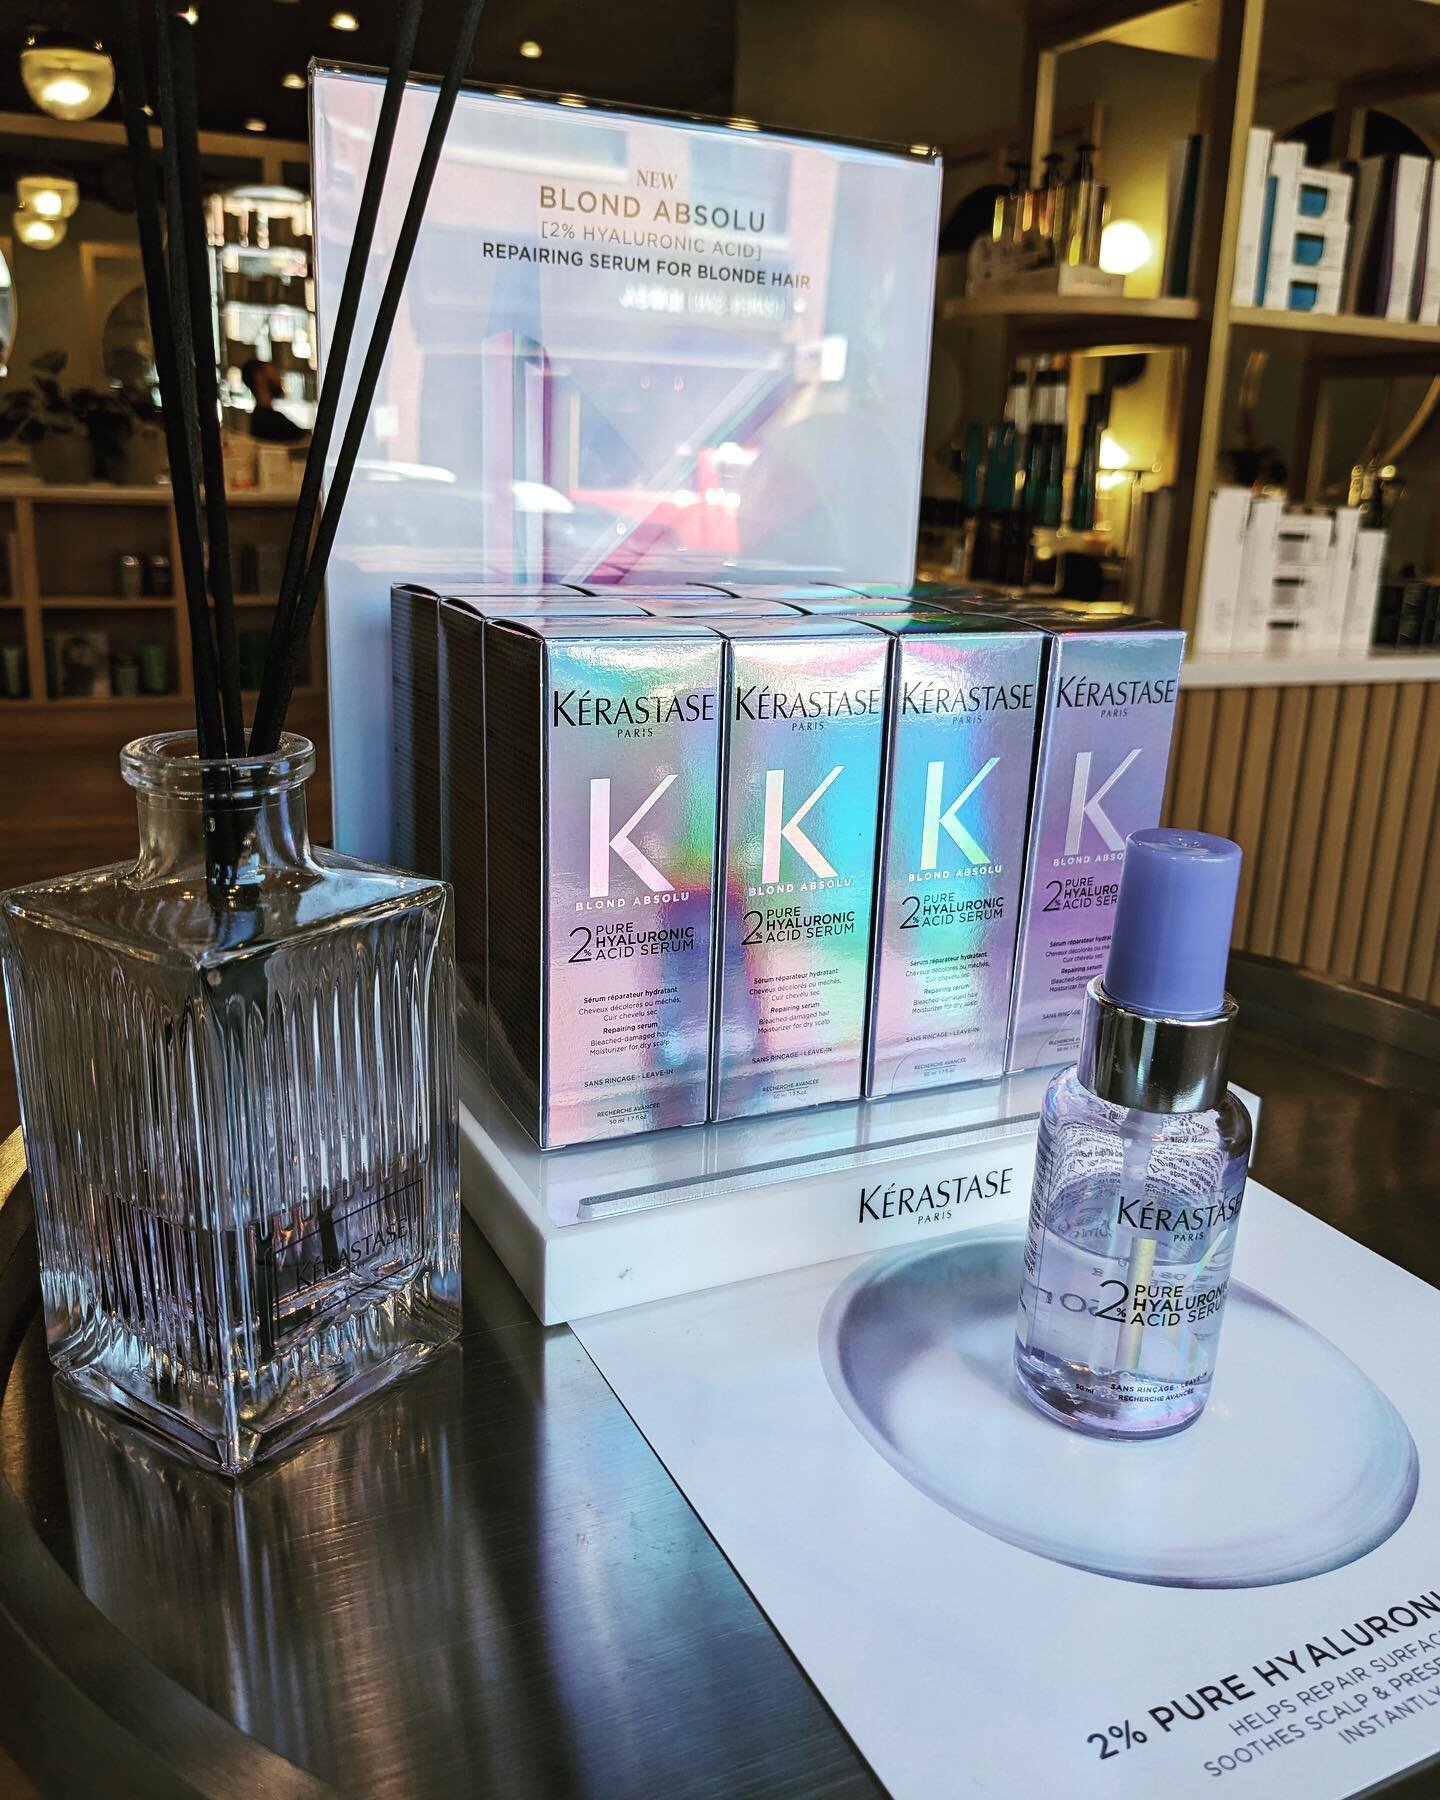 New product alert! This luxury serum provides instant hydration while repairing surface damage in one use and soothing the scalp!  @kerastase_official  kerastase #k&eacute;rastase 
#HyaluronicAcidHairSerum
#HairSalonBeauty
#HealthyHairCare
#HairSerum